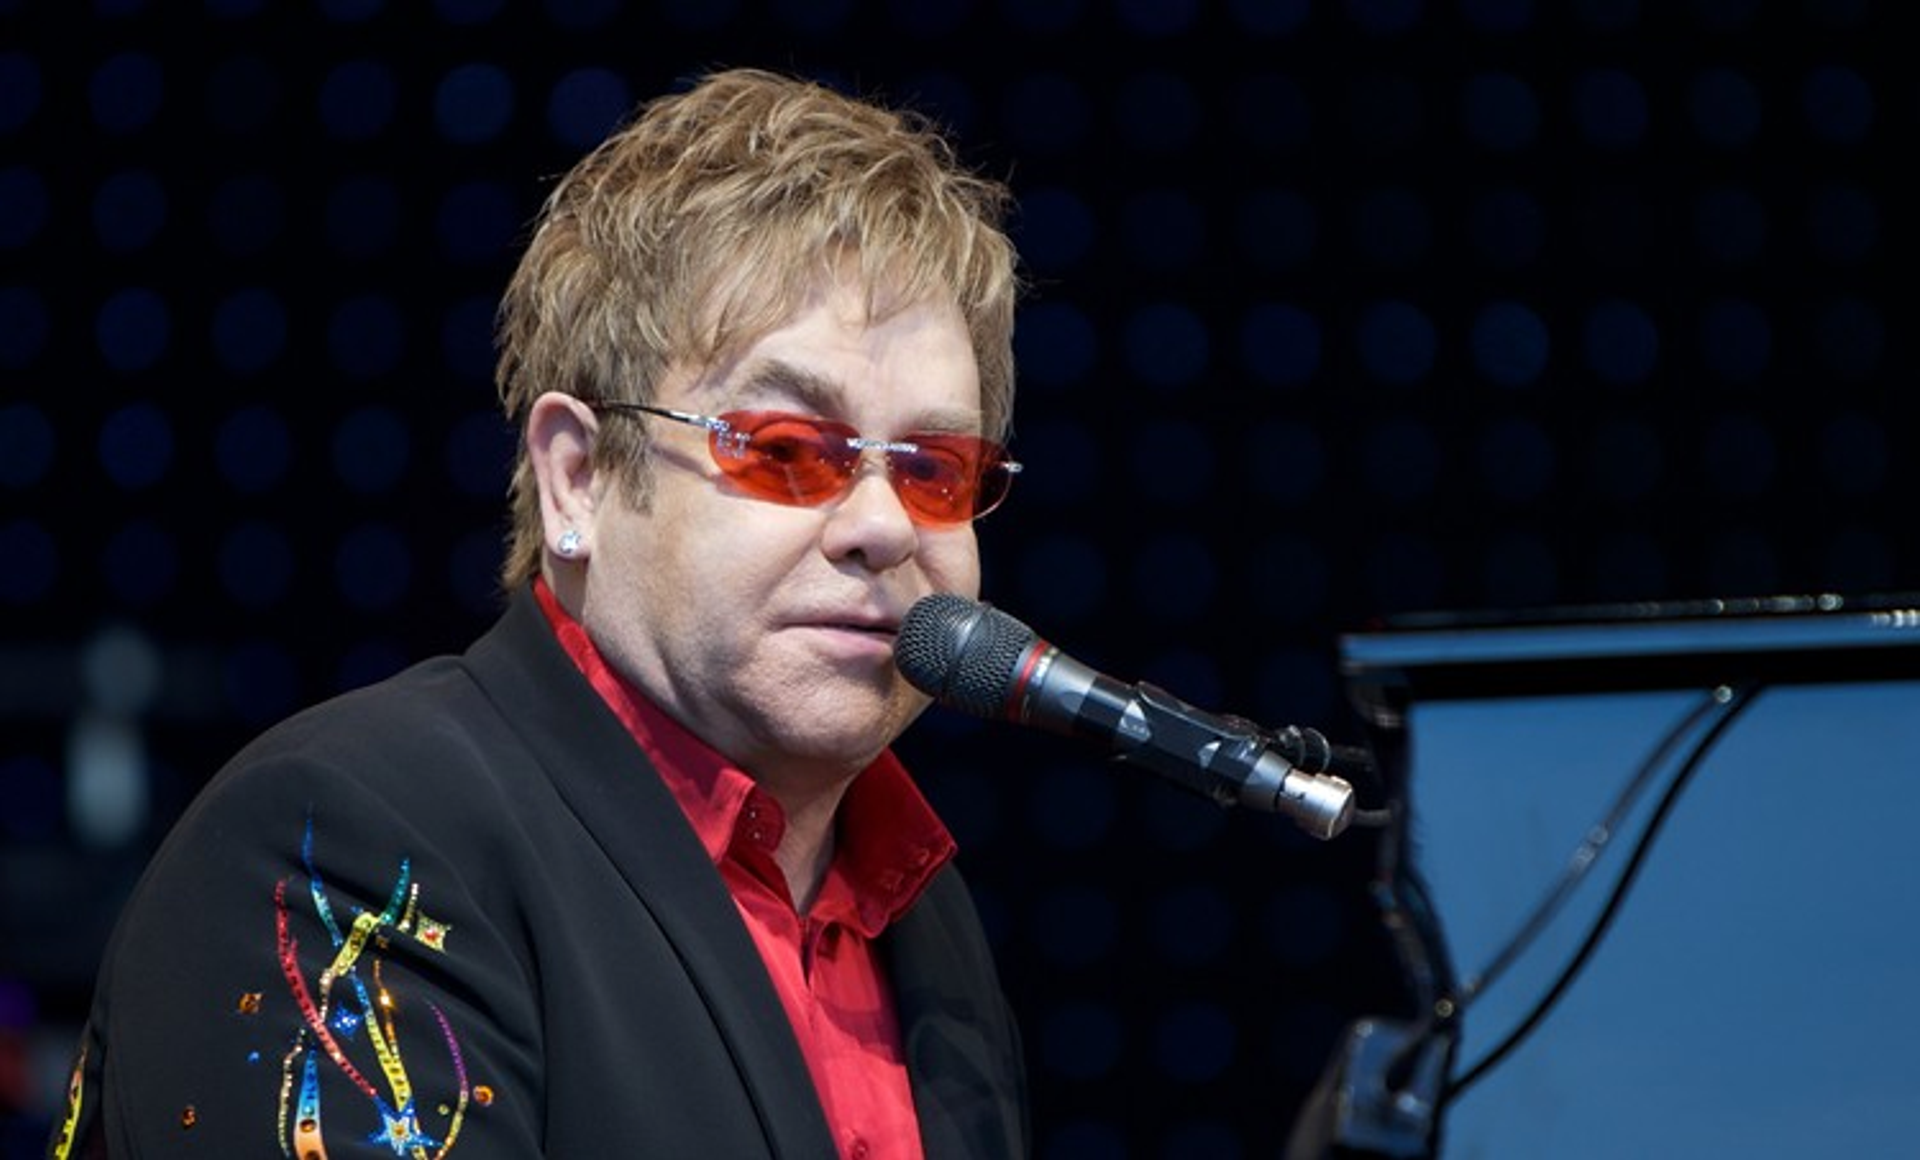 This photograph shows singer Elton John wearing his signature colourful glasses, sitting at a piano and singing into a microphone.